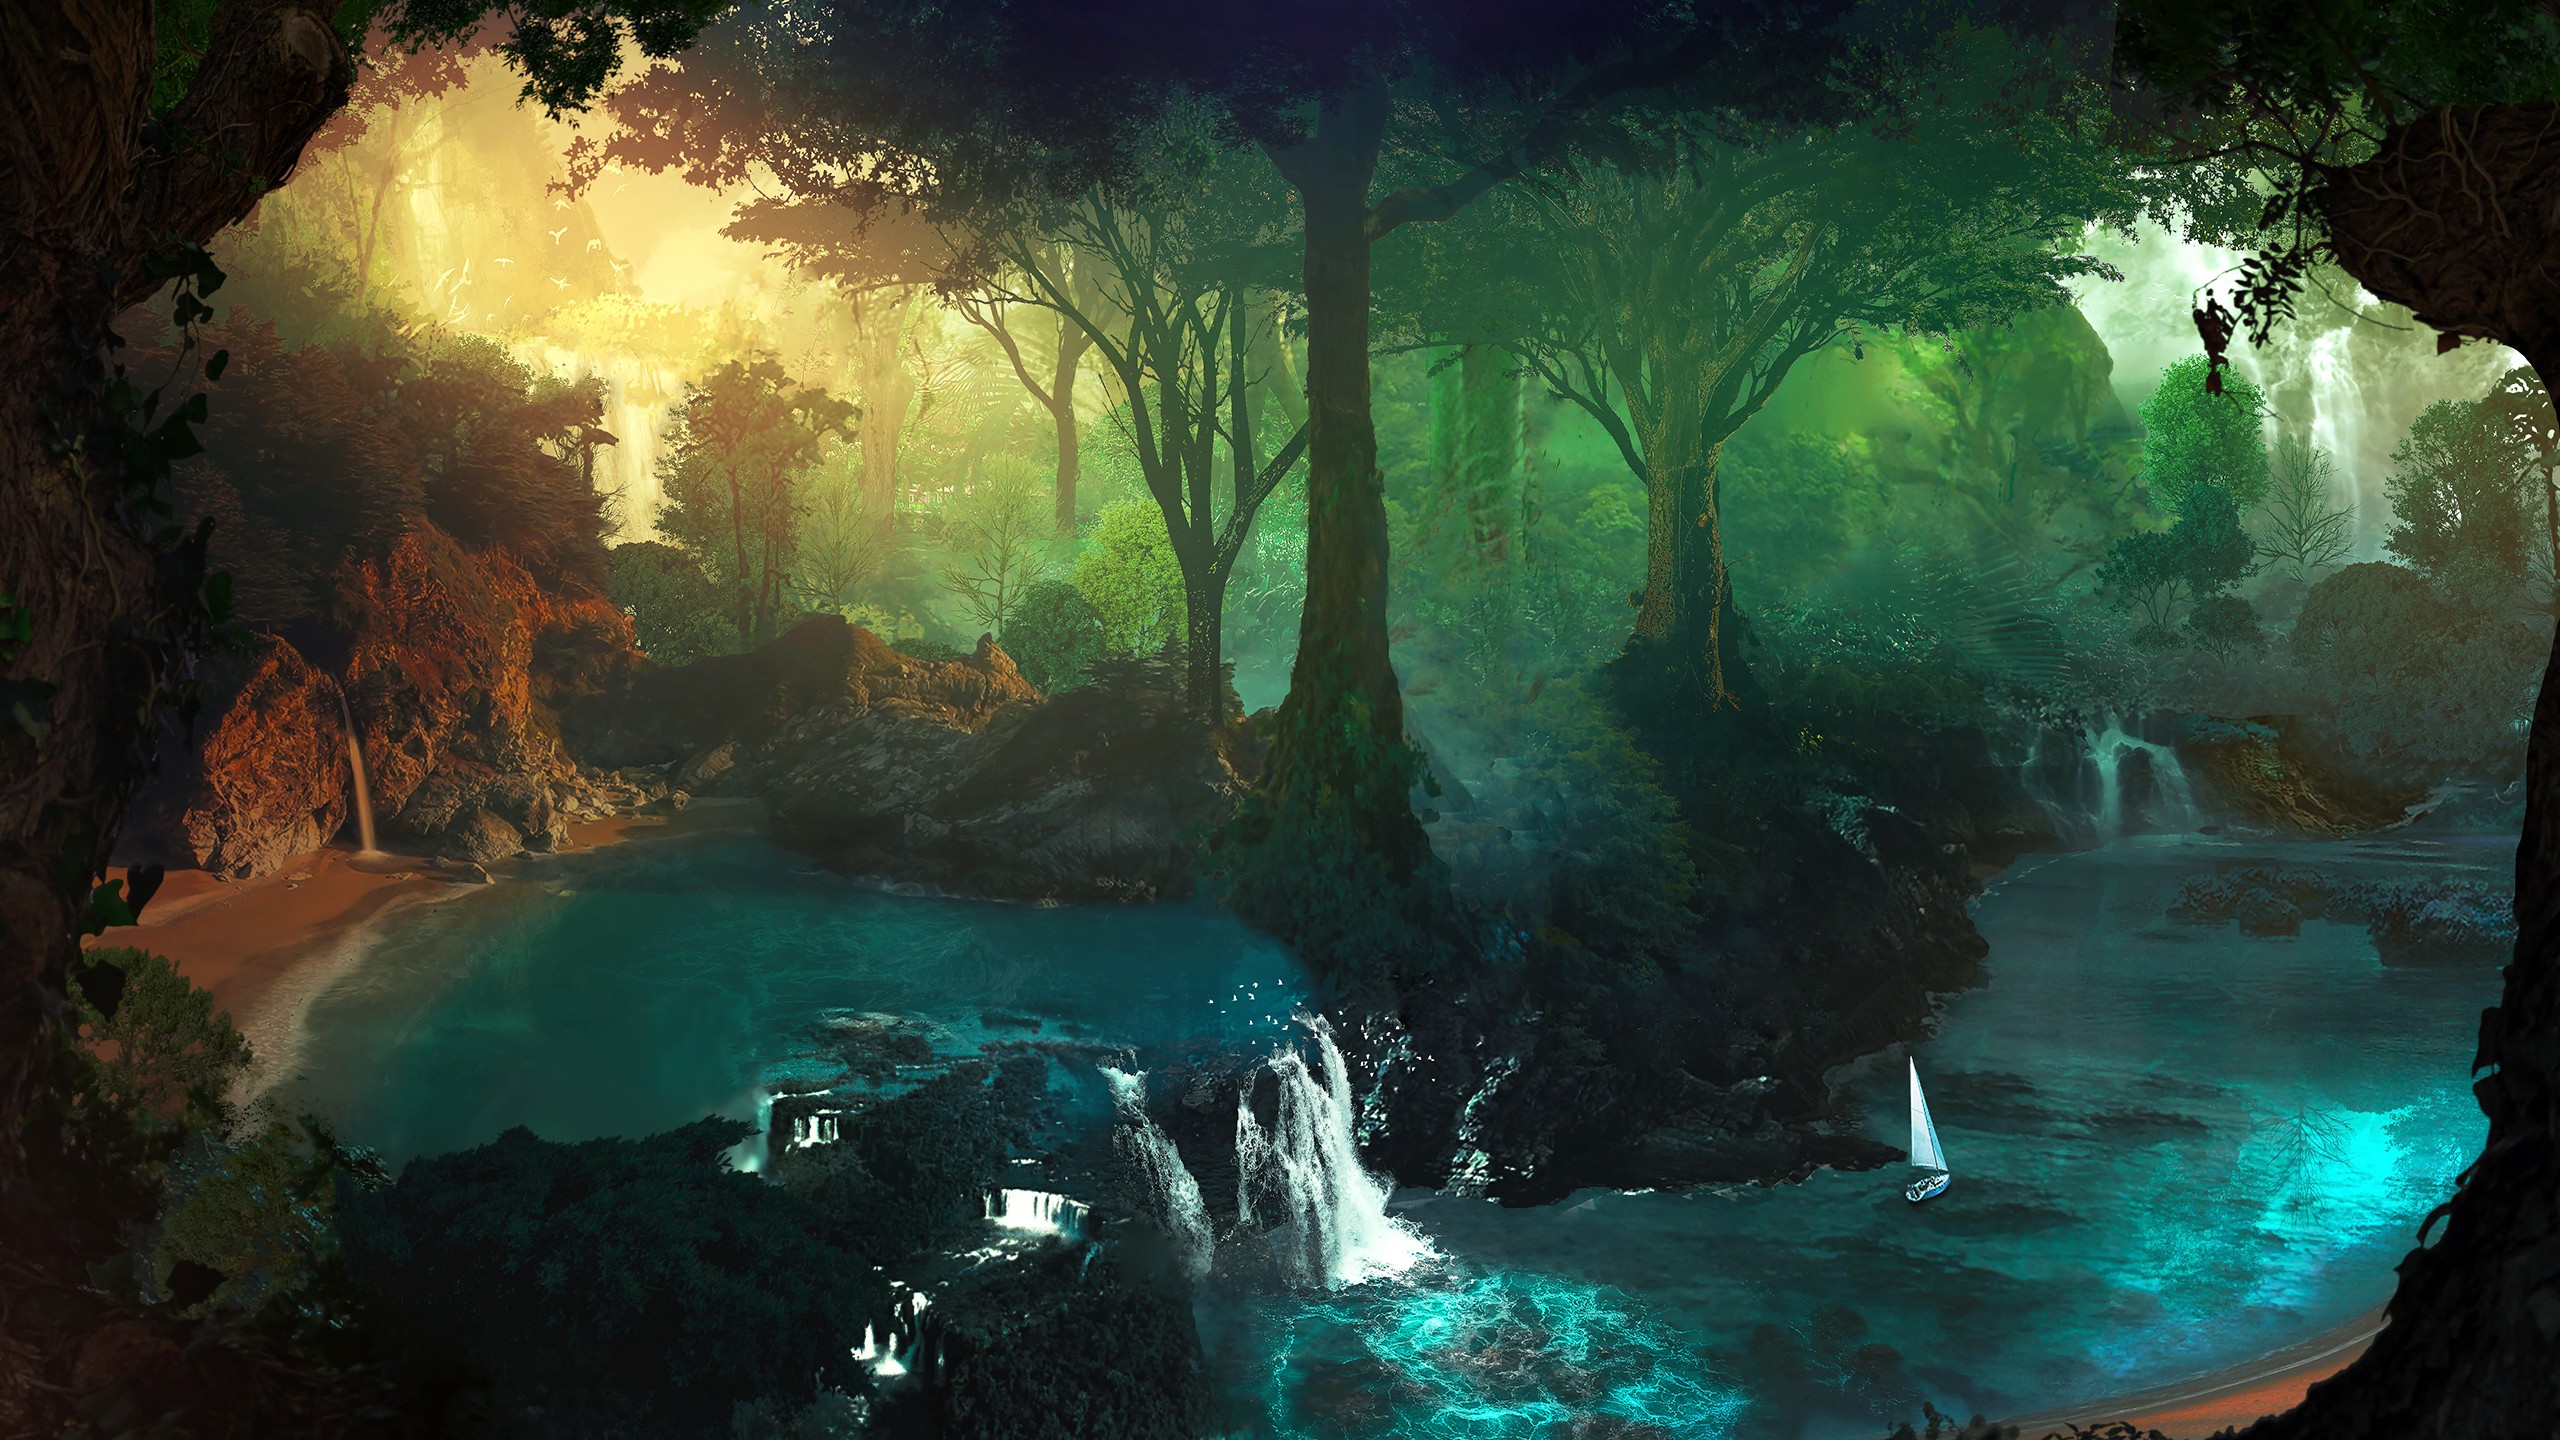 Forest Trees Artwork Nature Water T1na Desktopography 2560x1440